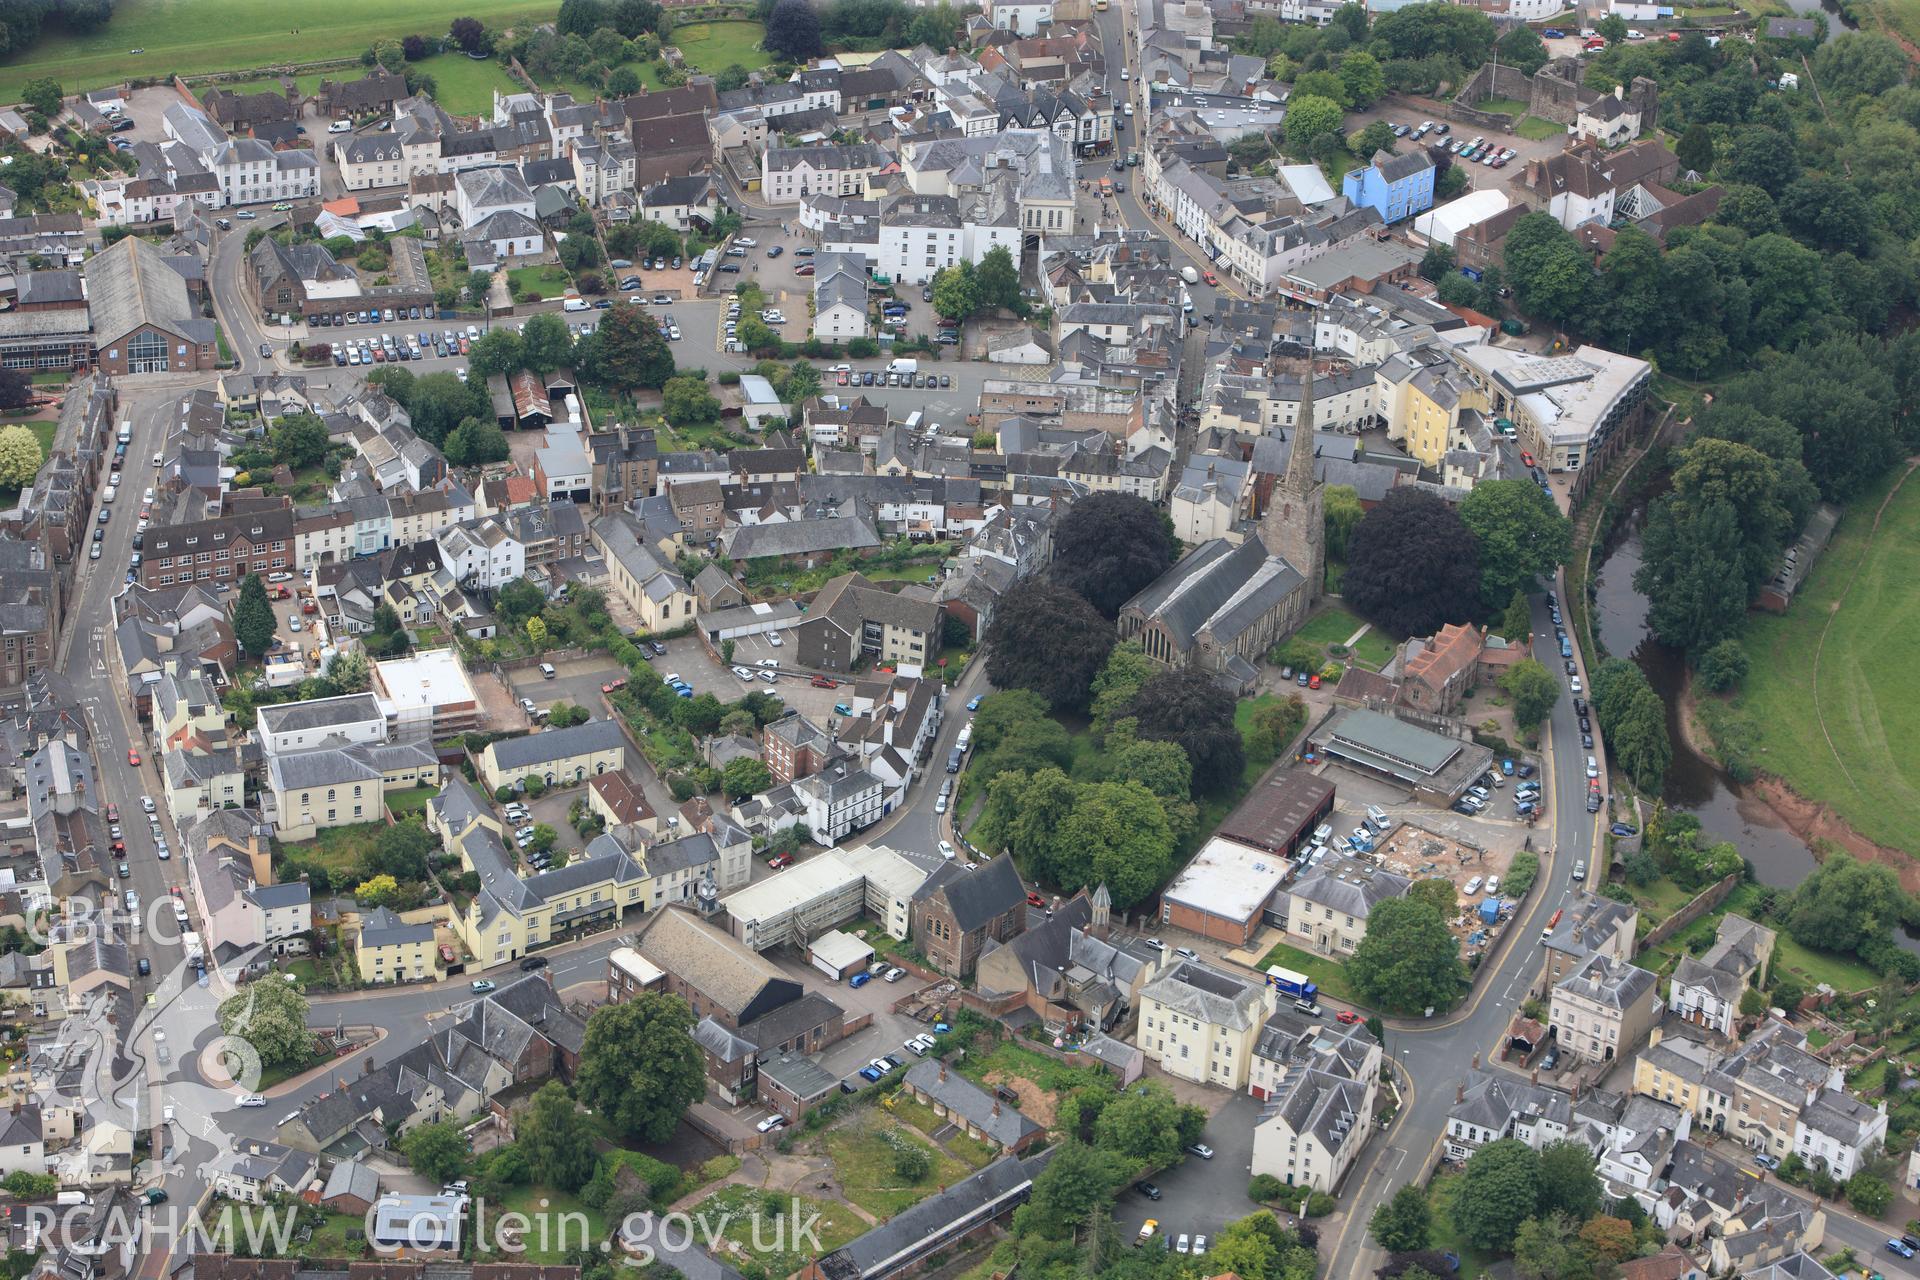 RCAHMW colour oblique photograph of Monmouth, with St Mary the Virgin Church. Taken by Toby Driver on 20/07/2011.